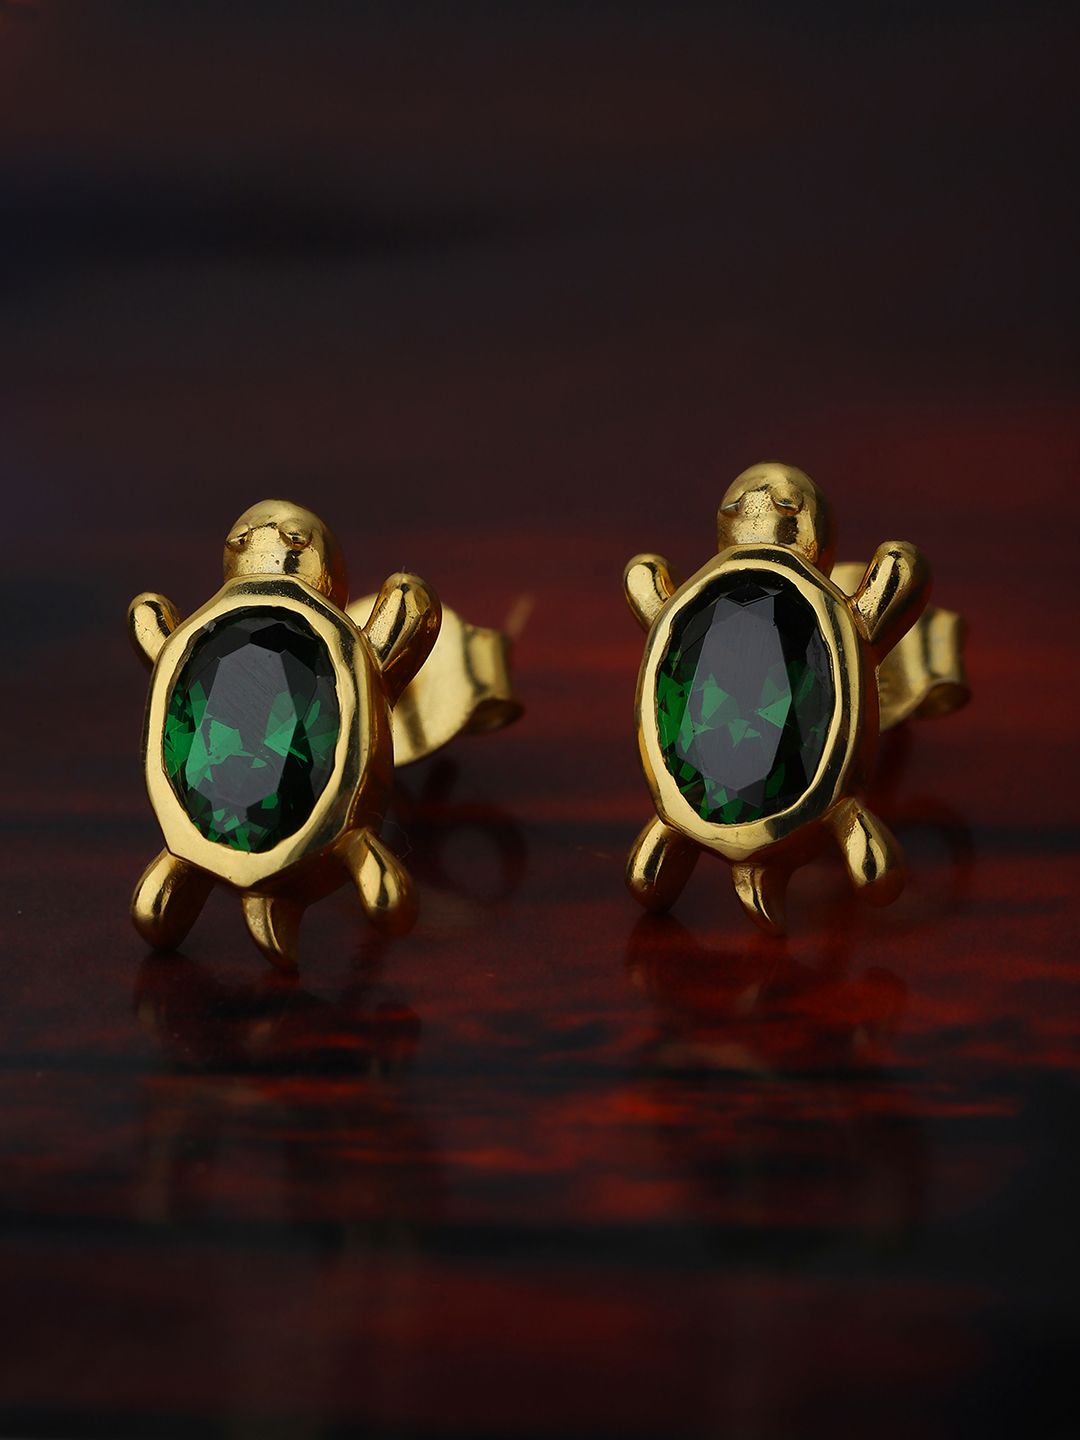 VANBELLE Gold-Toned Animal Shaped Studs Earrings Price in India